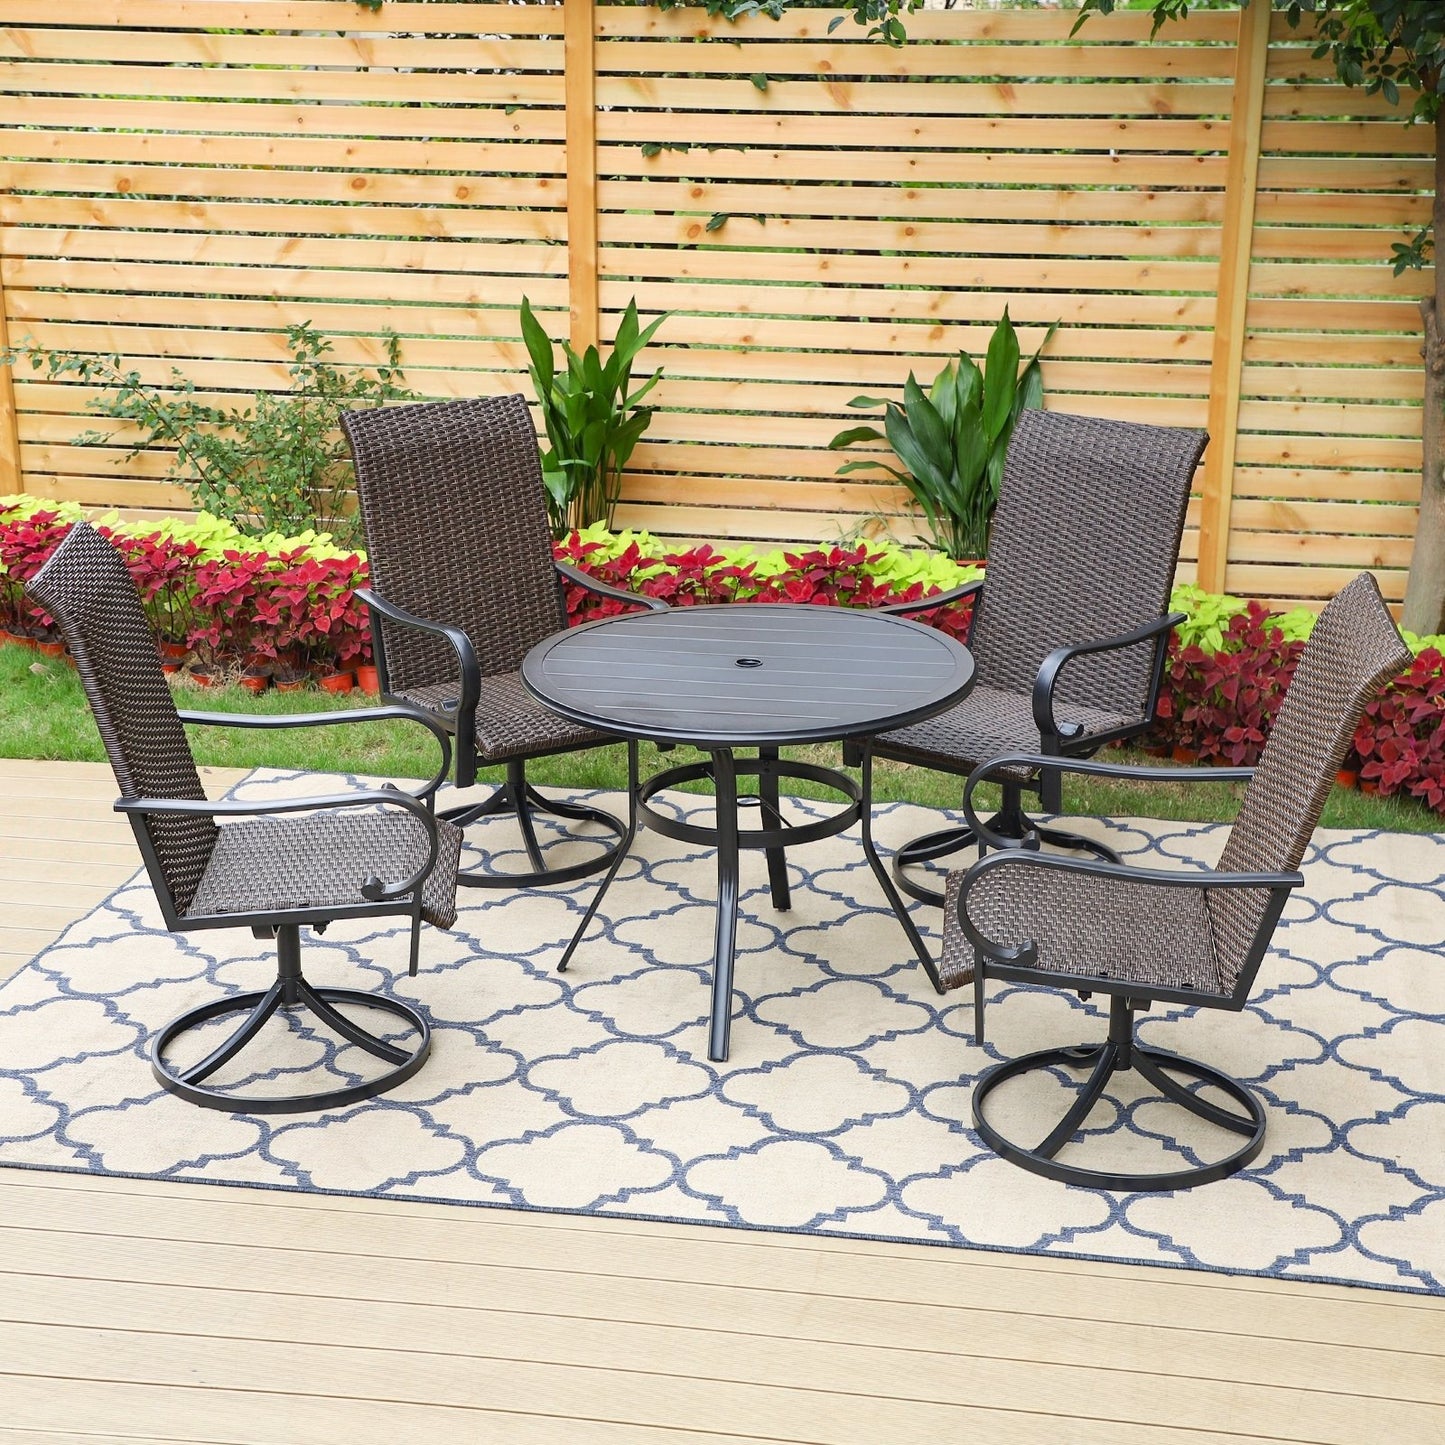 Sophia & William 5 Peices Outdoor Patio Dining Set Rattan Dining Chairs and Round Metal Table Set Suitable for 4 People